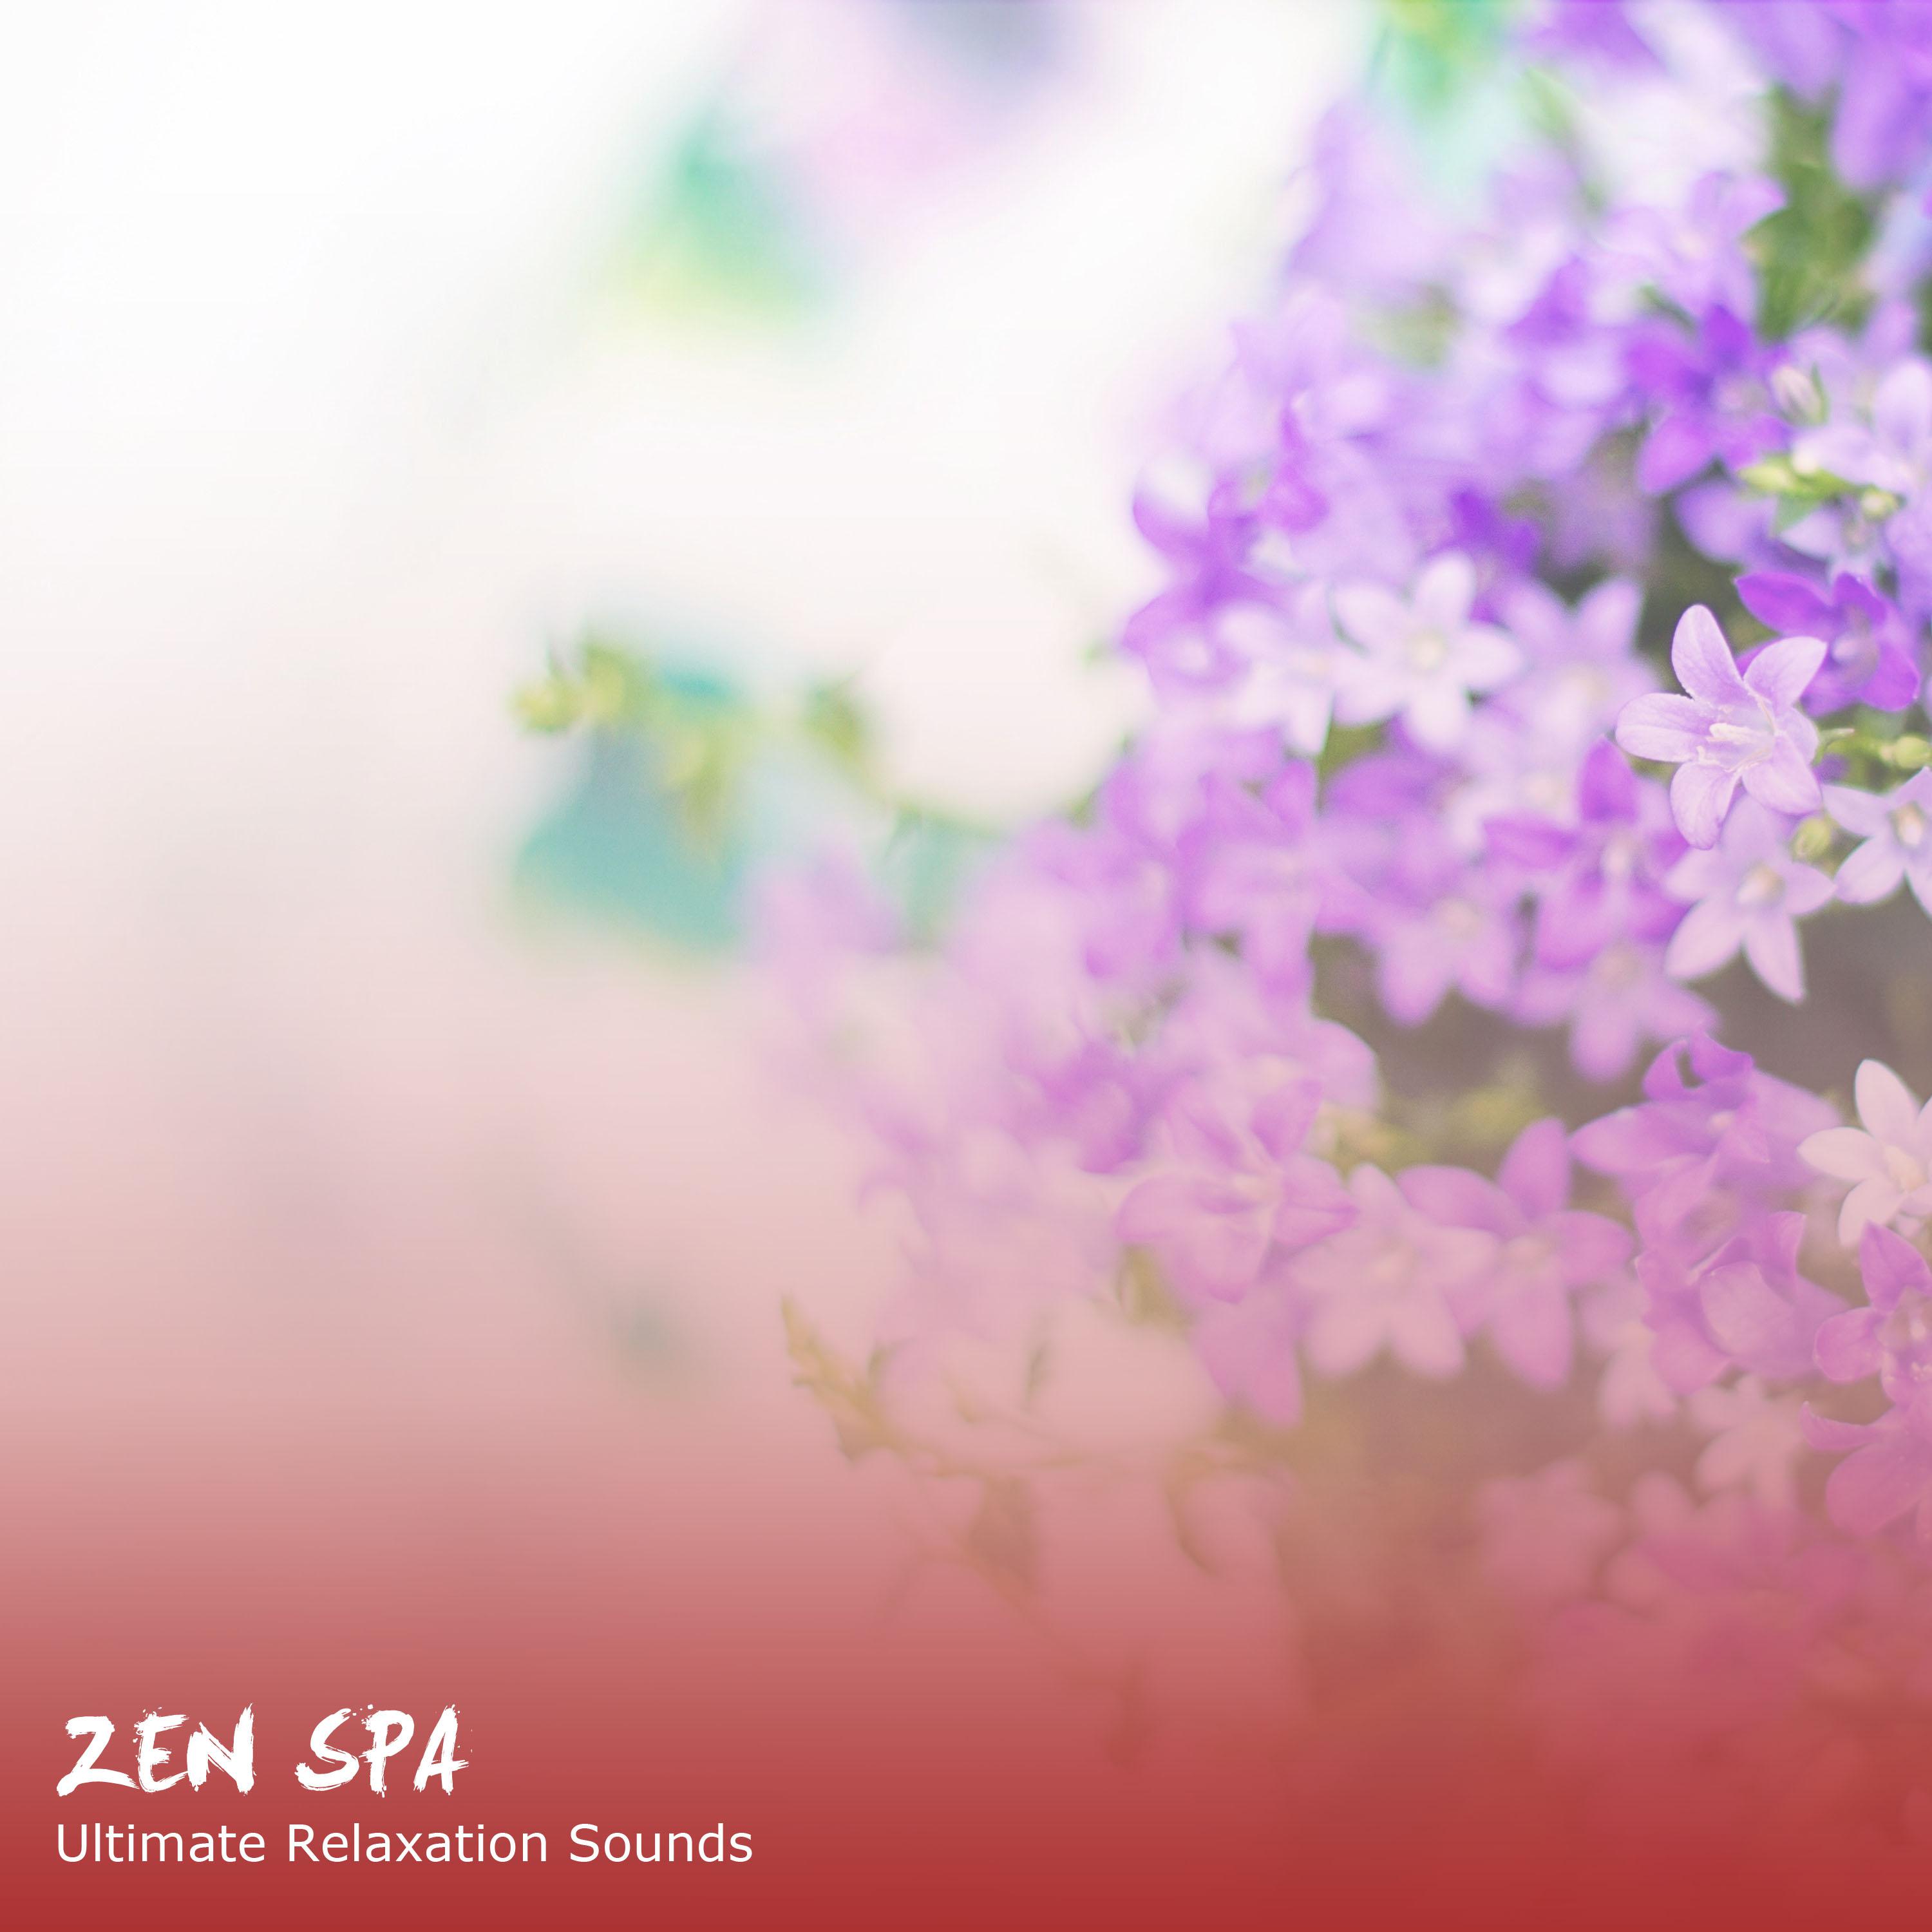 19 Zen Spa and Ultimate Relaxation Sounds